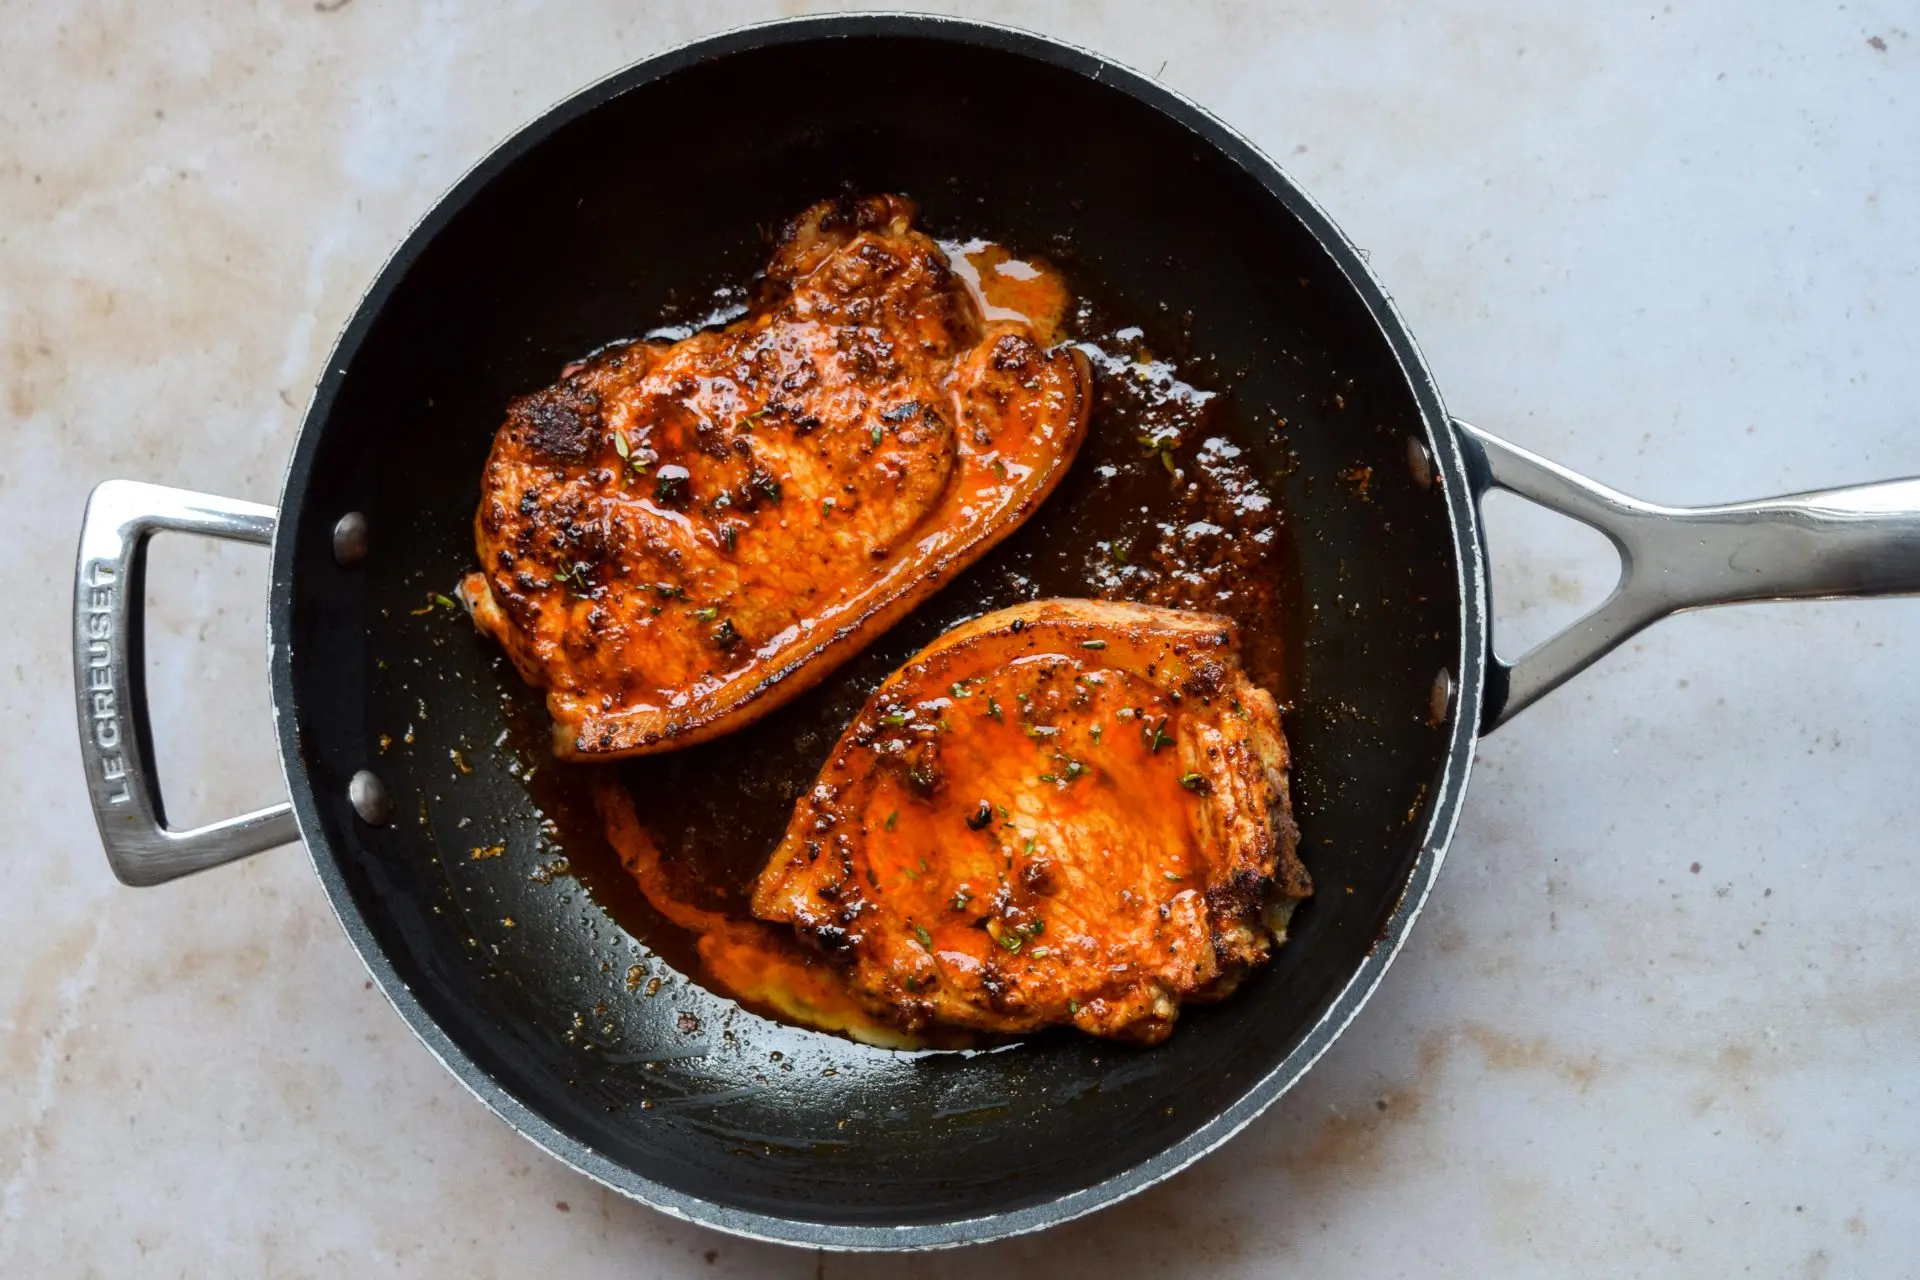 pork chops with smoked paprika - What is the best season for pork chops